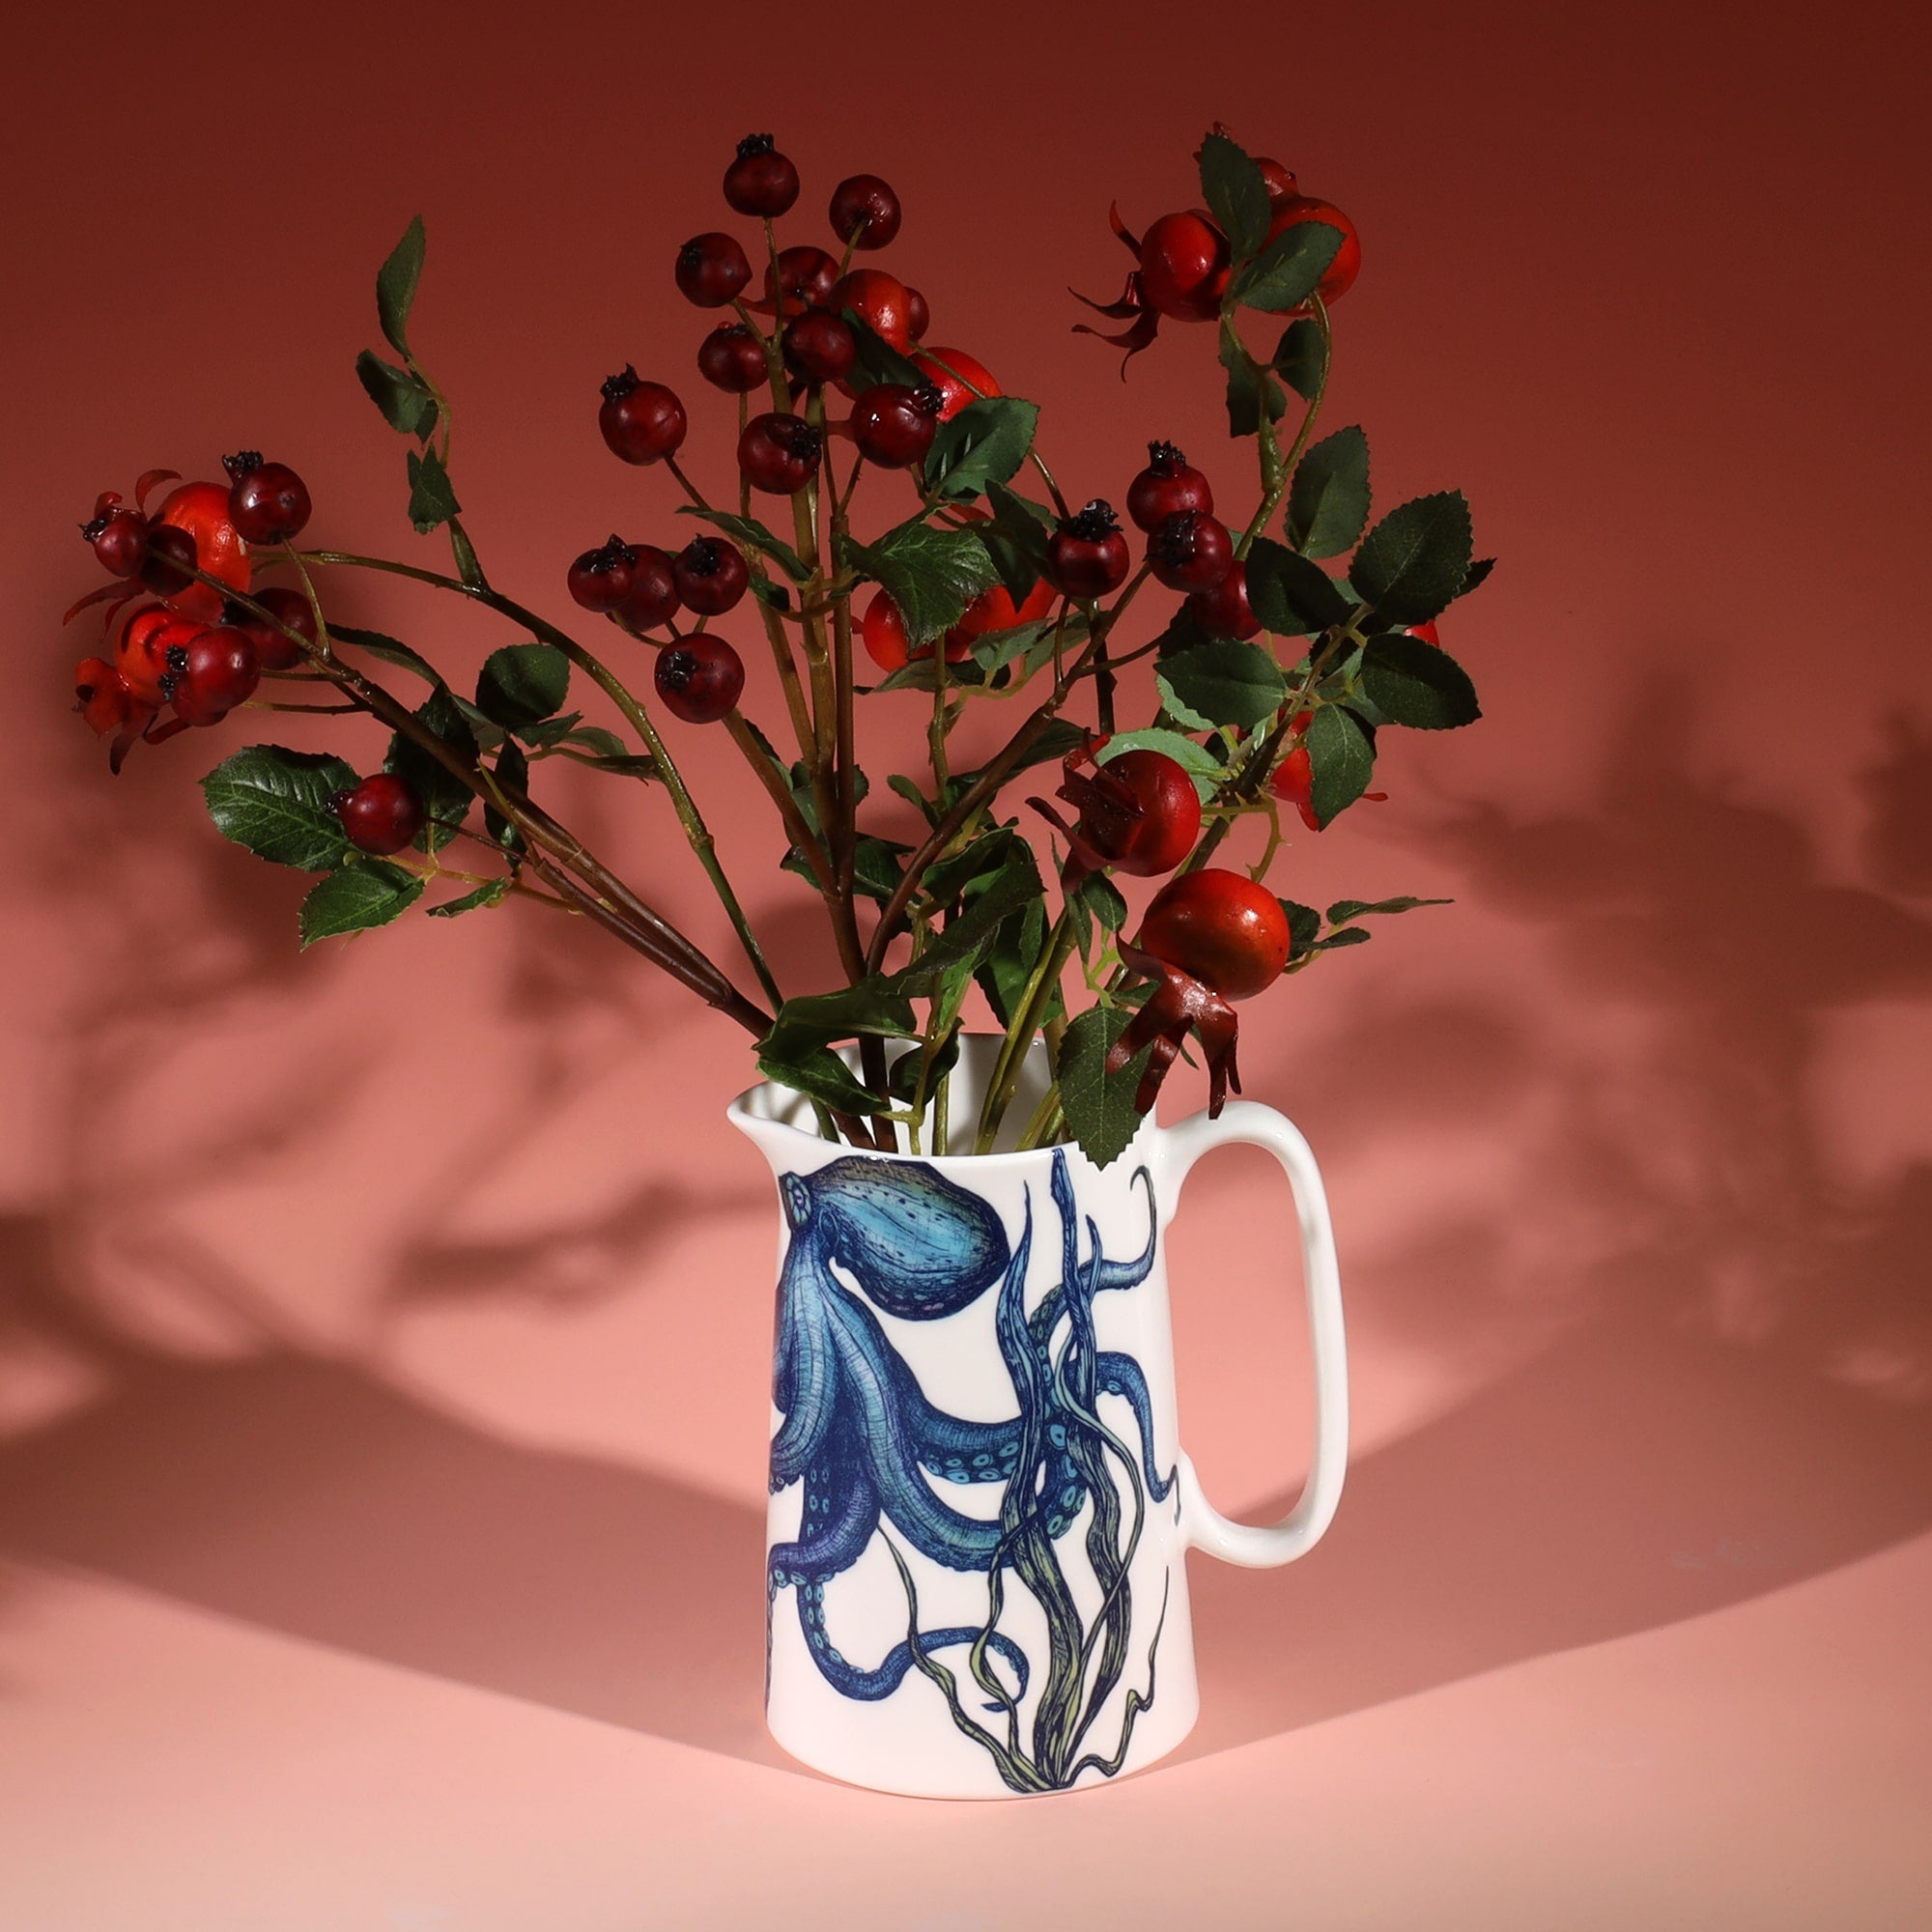 White jug with a brightly coloured blue and green octopus and seaweed design on a graduated coral coloured background with red rose hip branches in the jug.